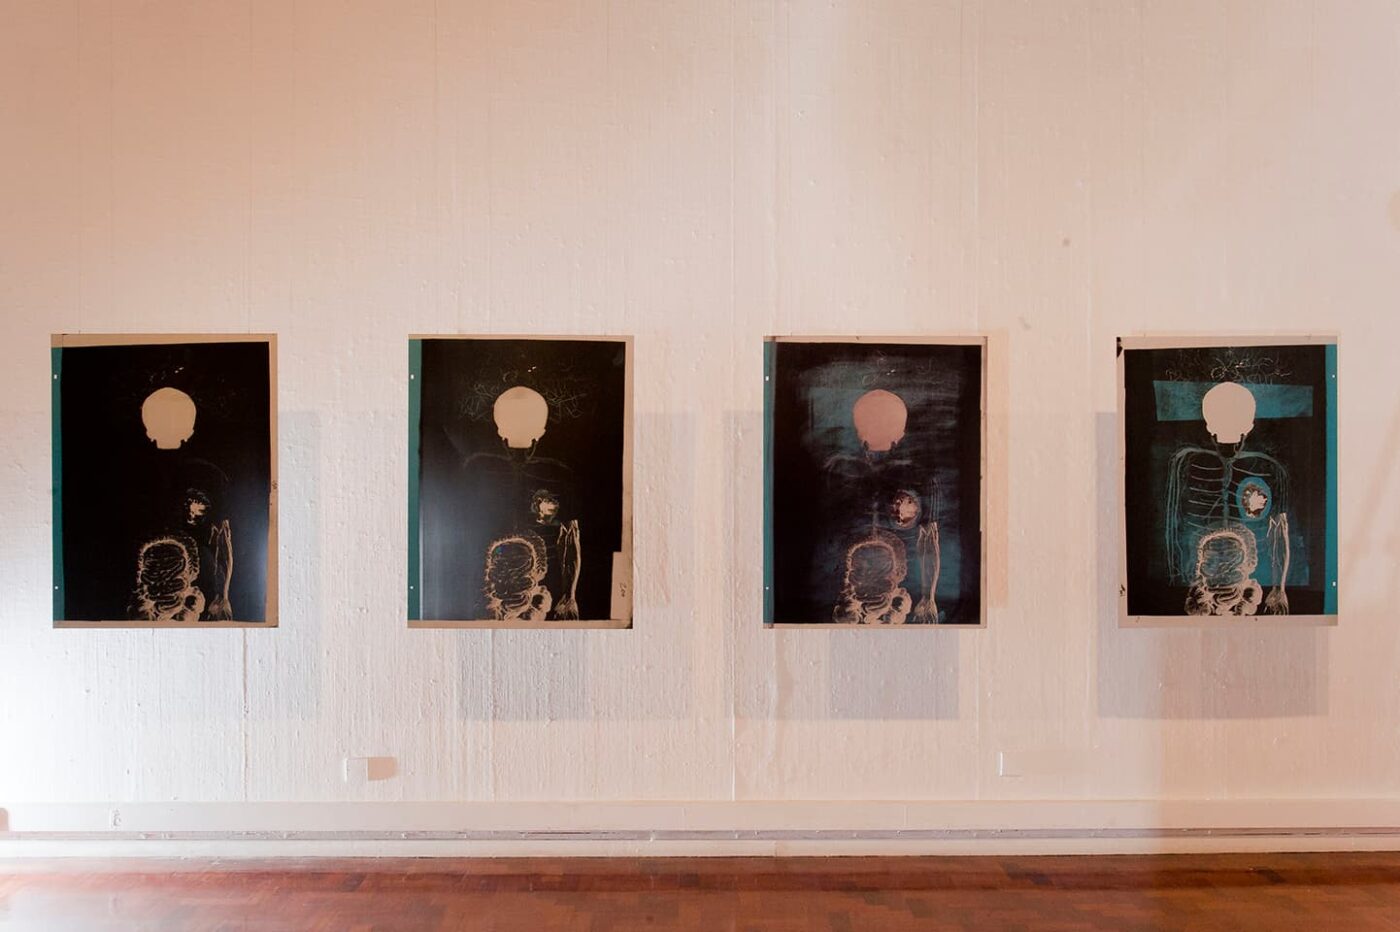 <strong>Reassembling the Self</strong>,  installation of 4 lithographic plates by Susan Aldworth, Hatton Gallery, Newcastle  2012. Photograph by Gavin Duthie.